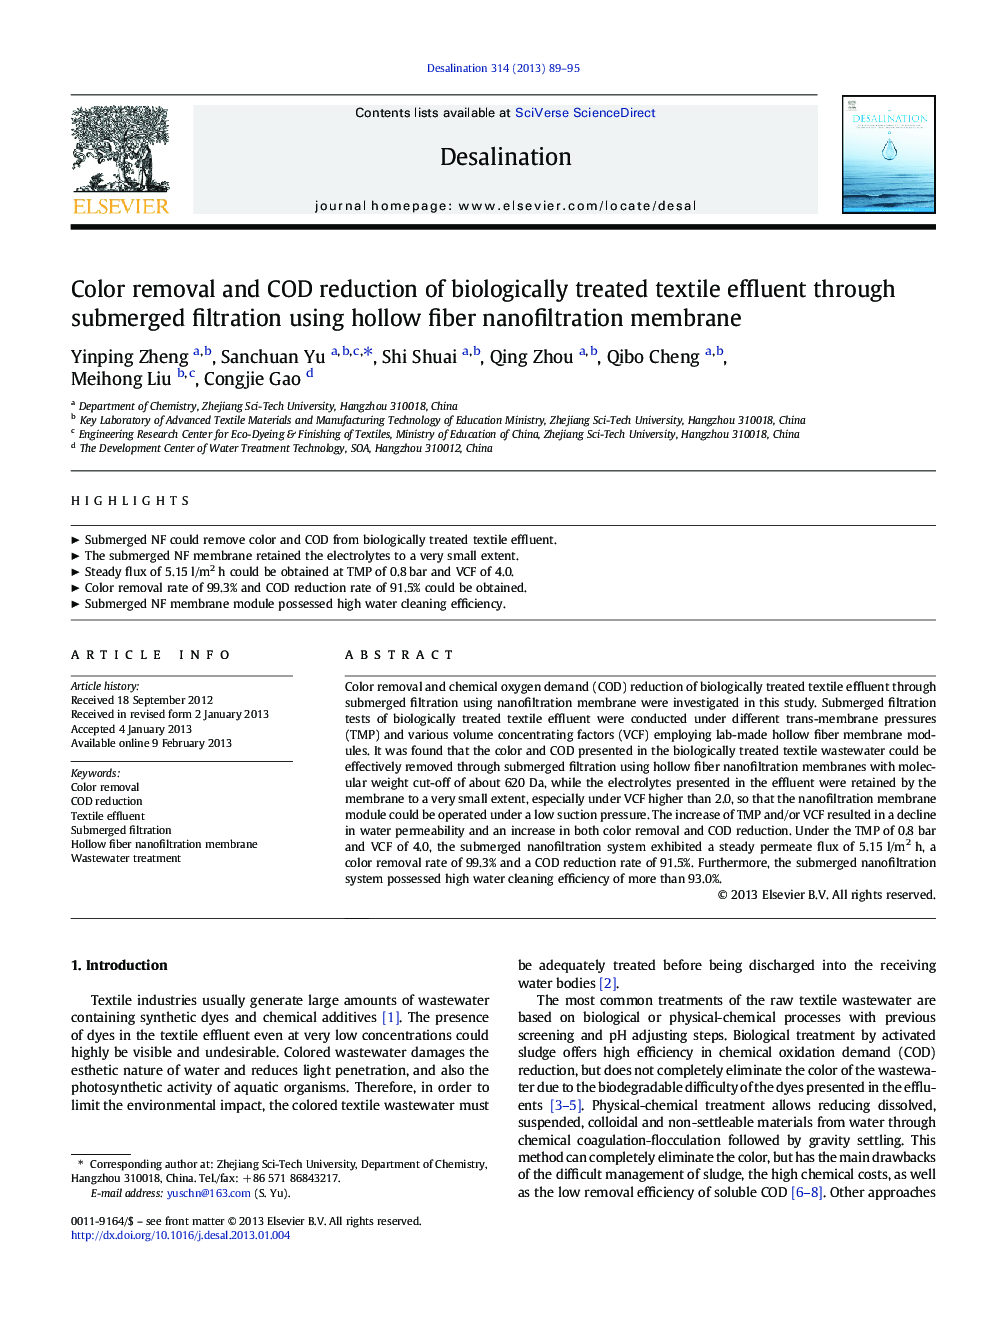 Color removal and COD reduction of biologically treated textile effluent through submerged filtration using hollow fiber nanofiltration membrane